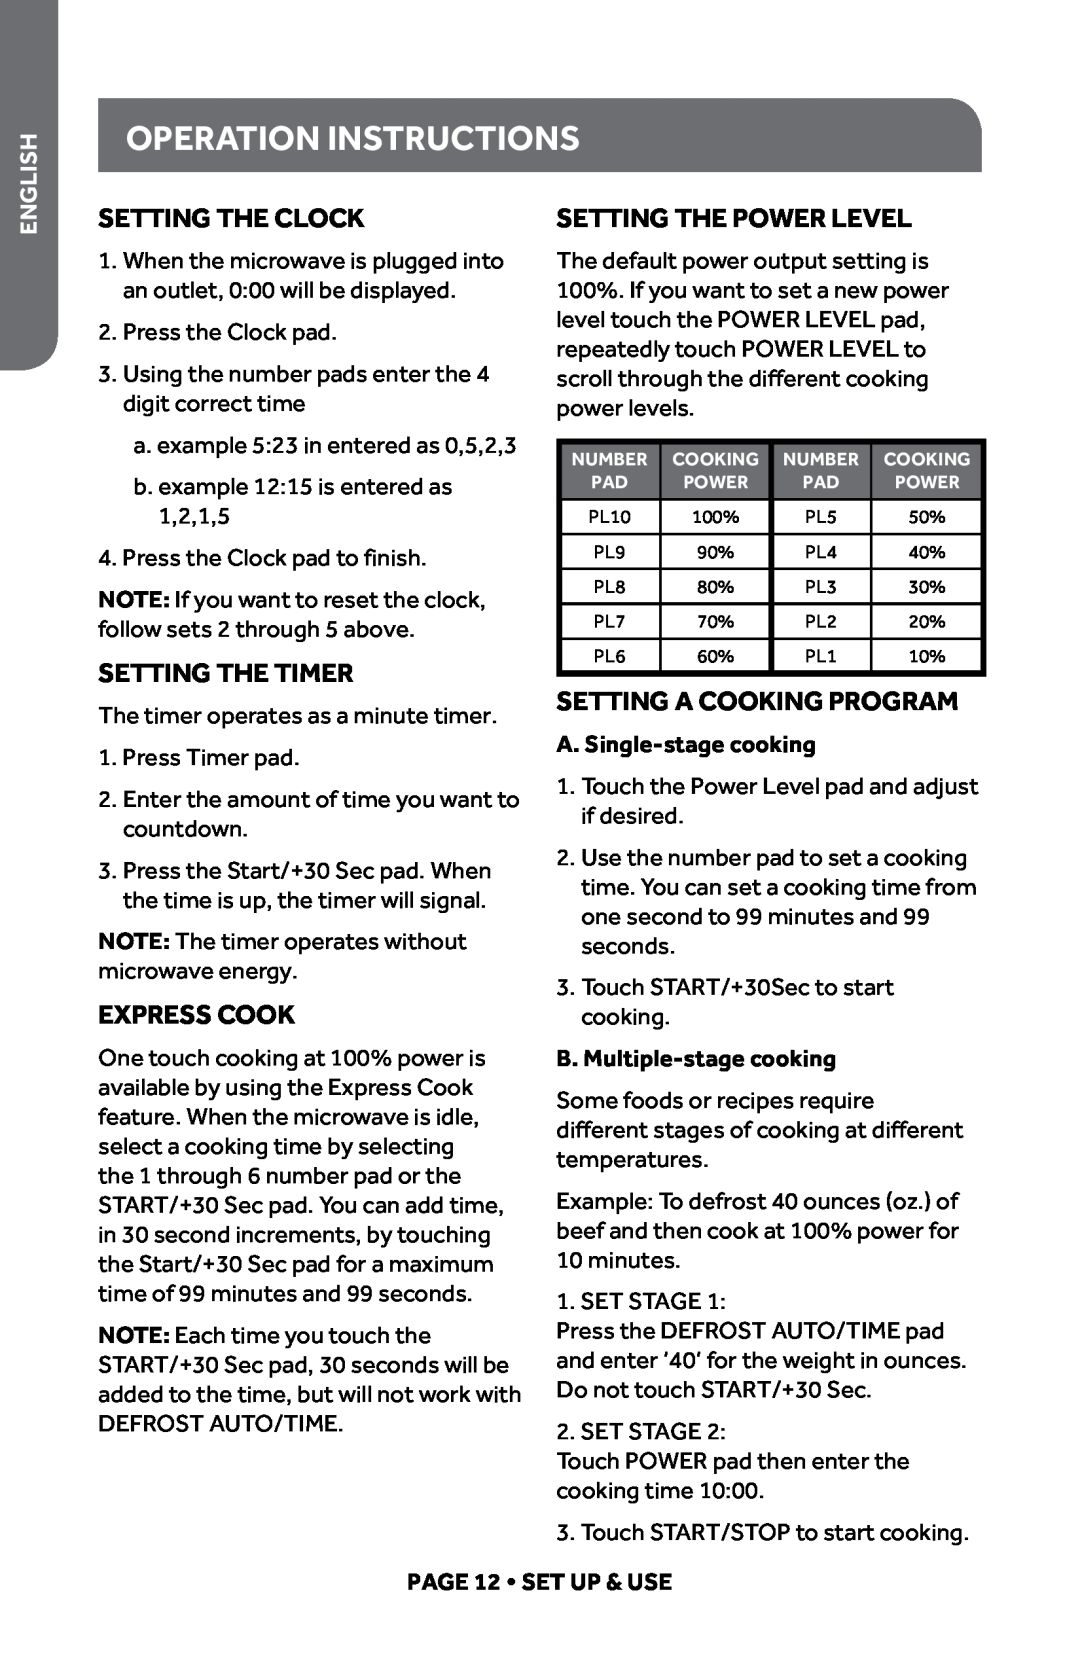 Haier HMC1085SESS Operation Instructions, Setting The Clock, Setting the Timer, Express Cook, Setting The Power Level 